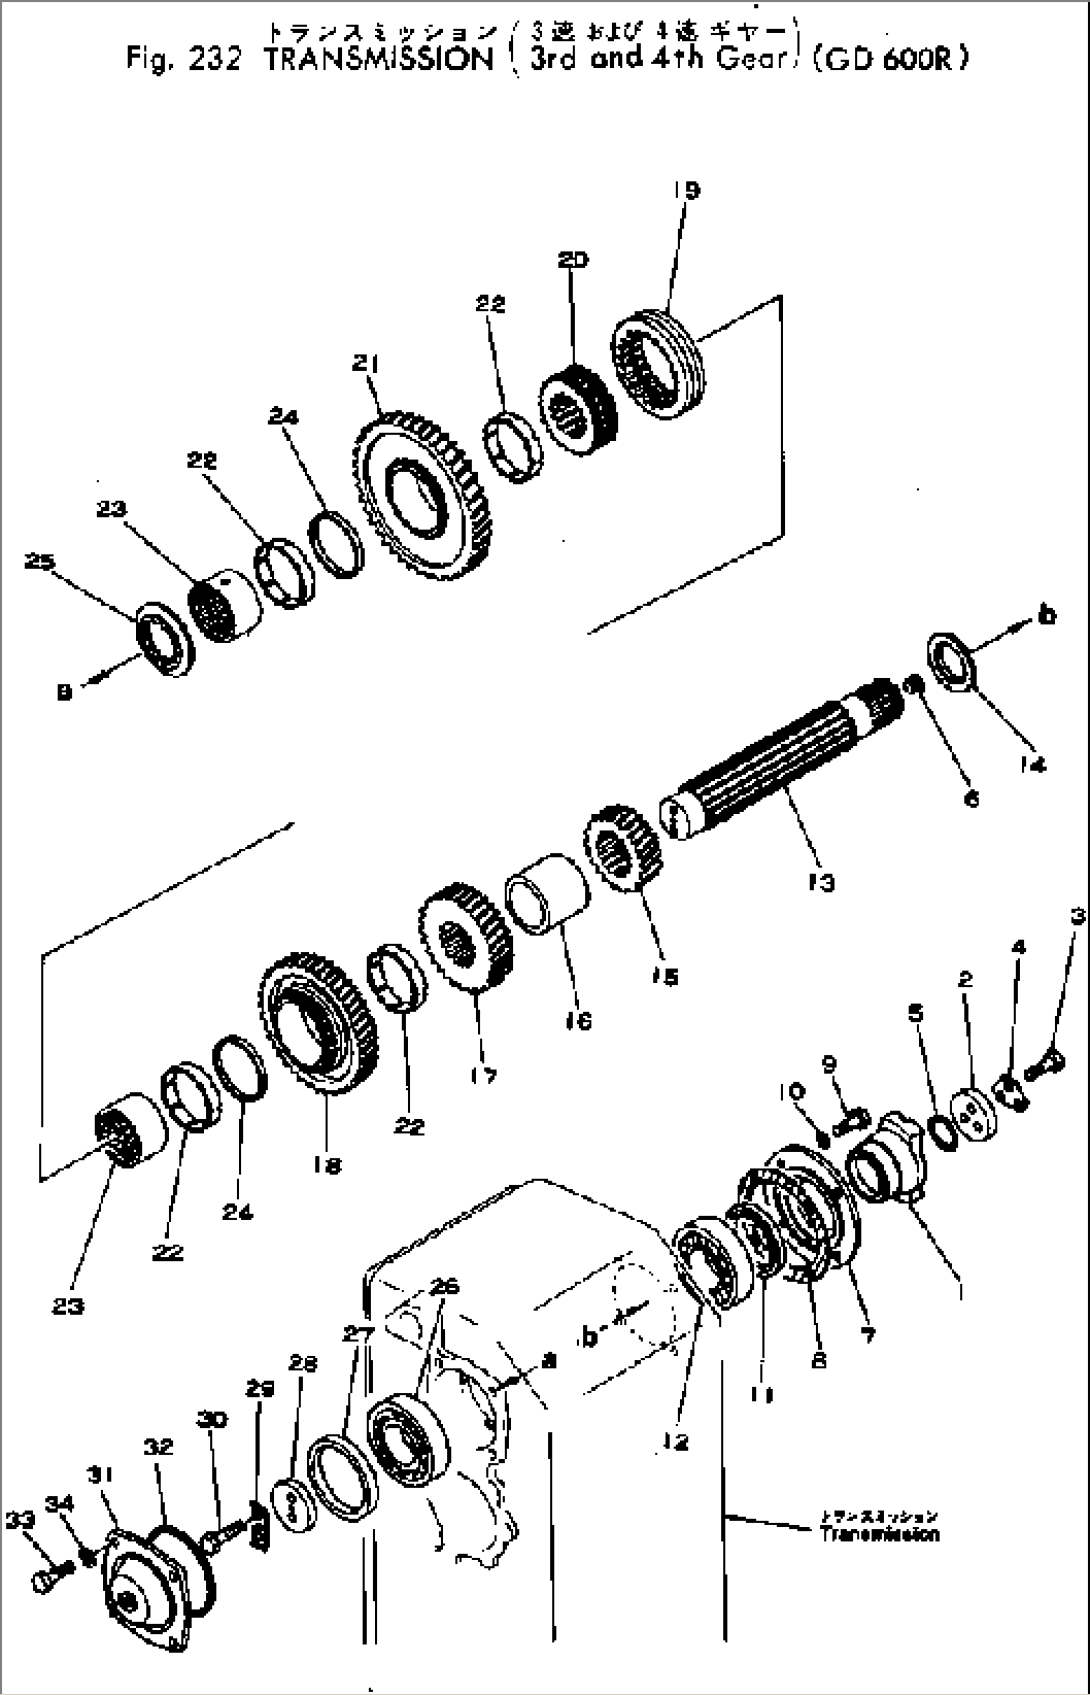 TRANSMISSION (3RD AND 4TH GEAR)